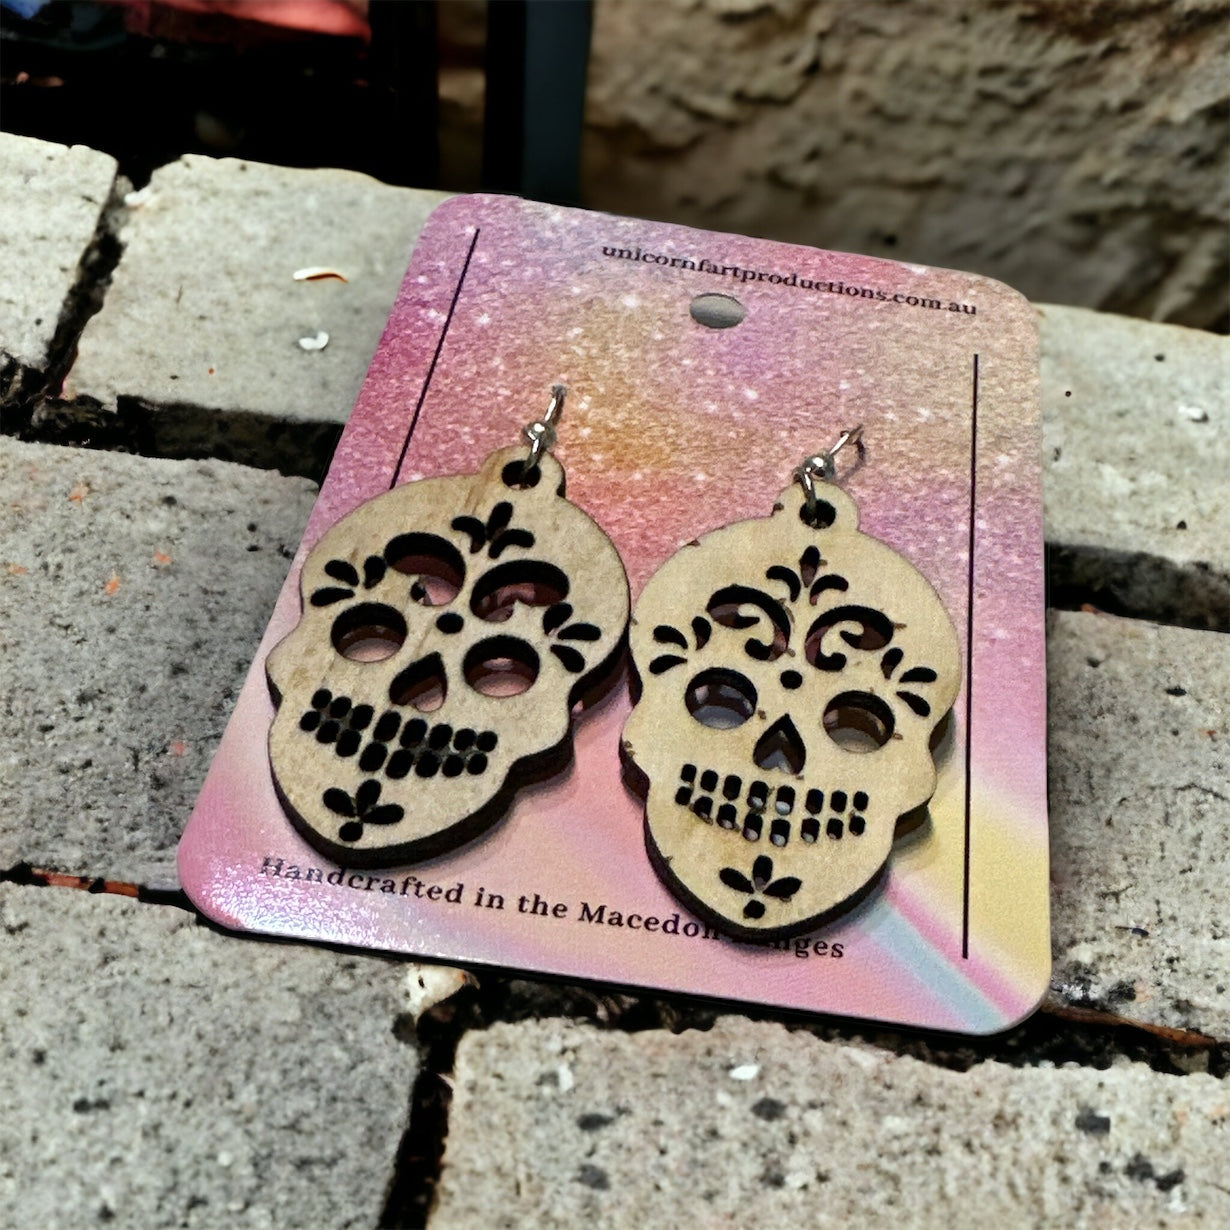 Wooden Handmade earrings crafted from sustainable timber - Skulls 2